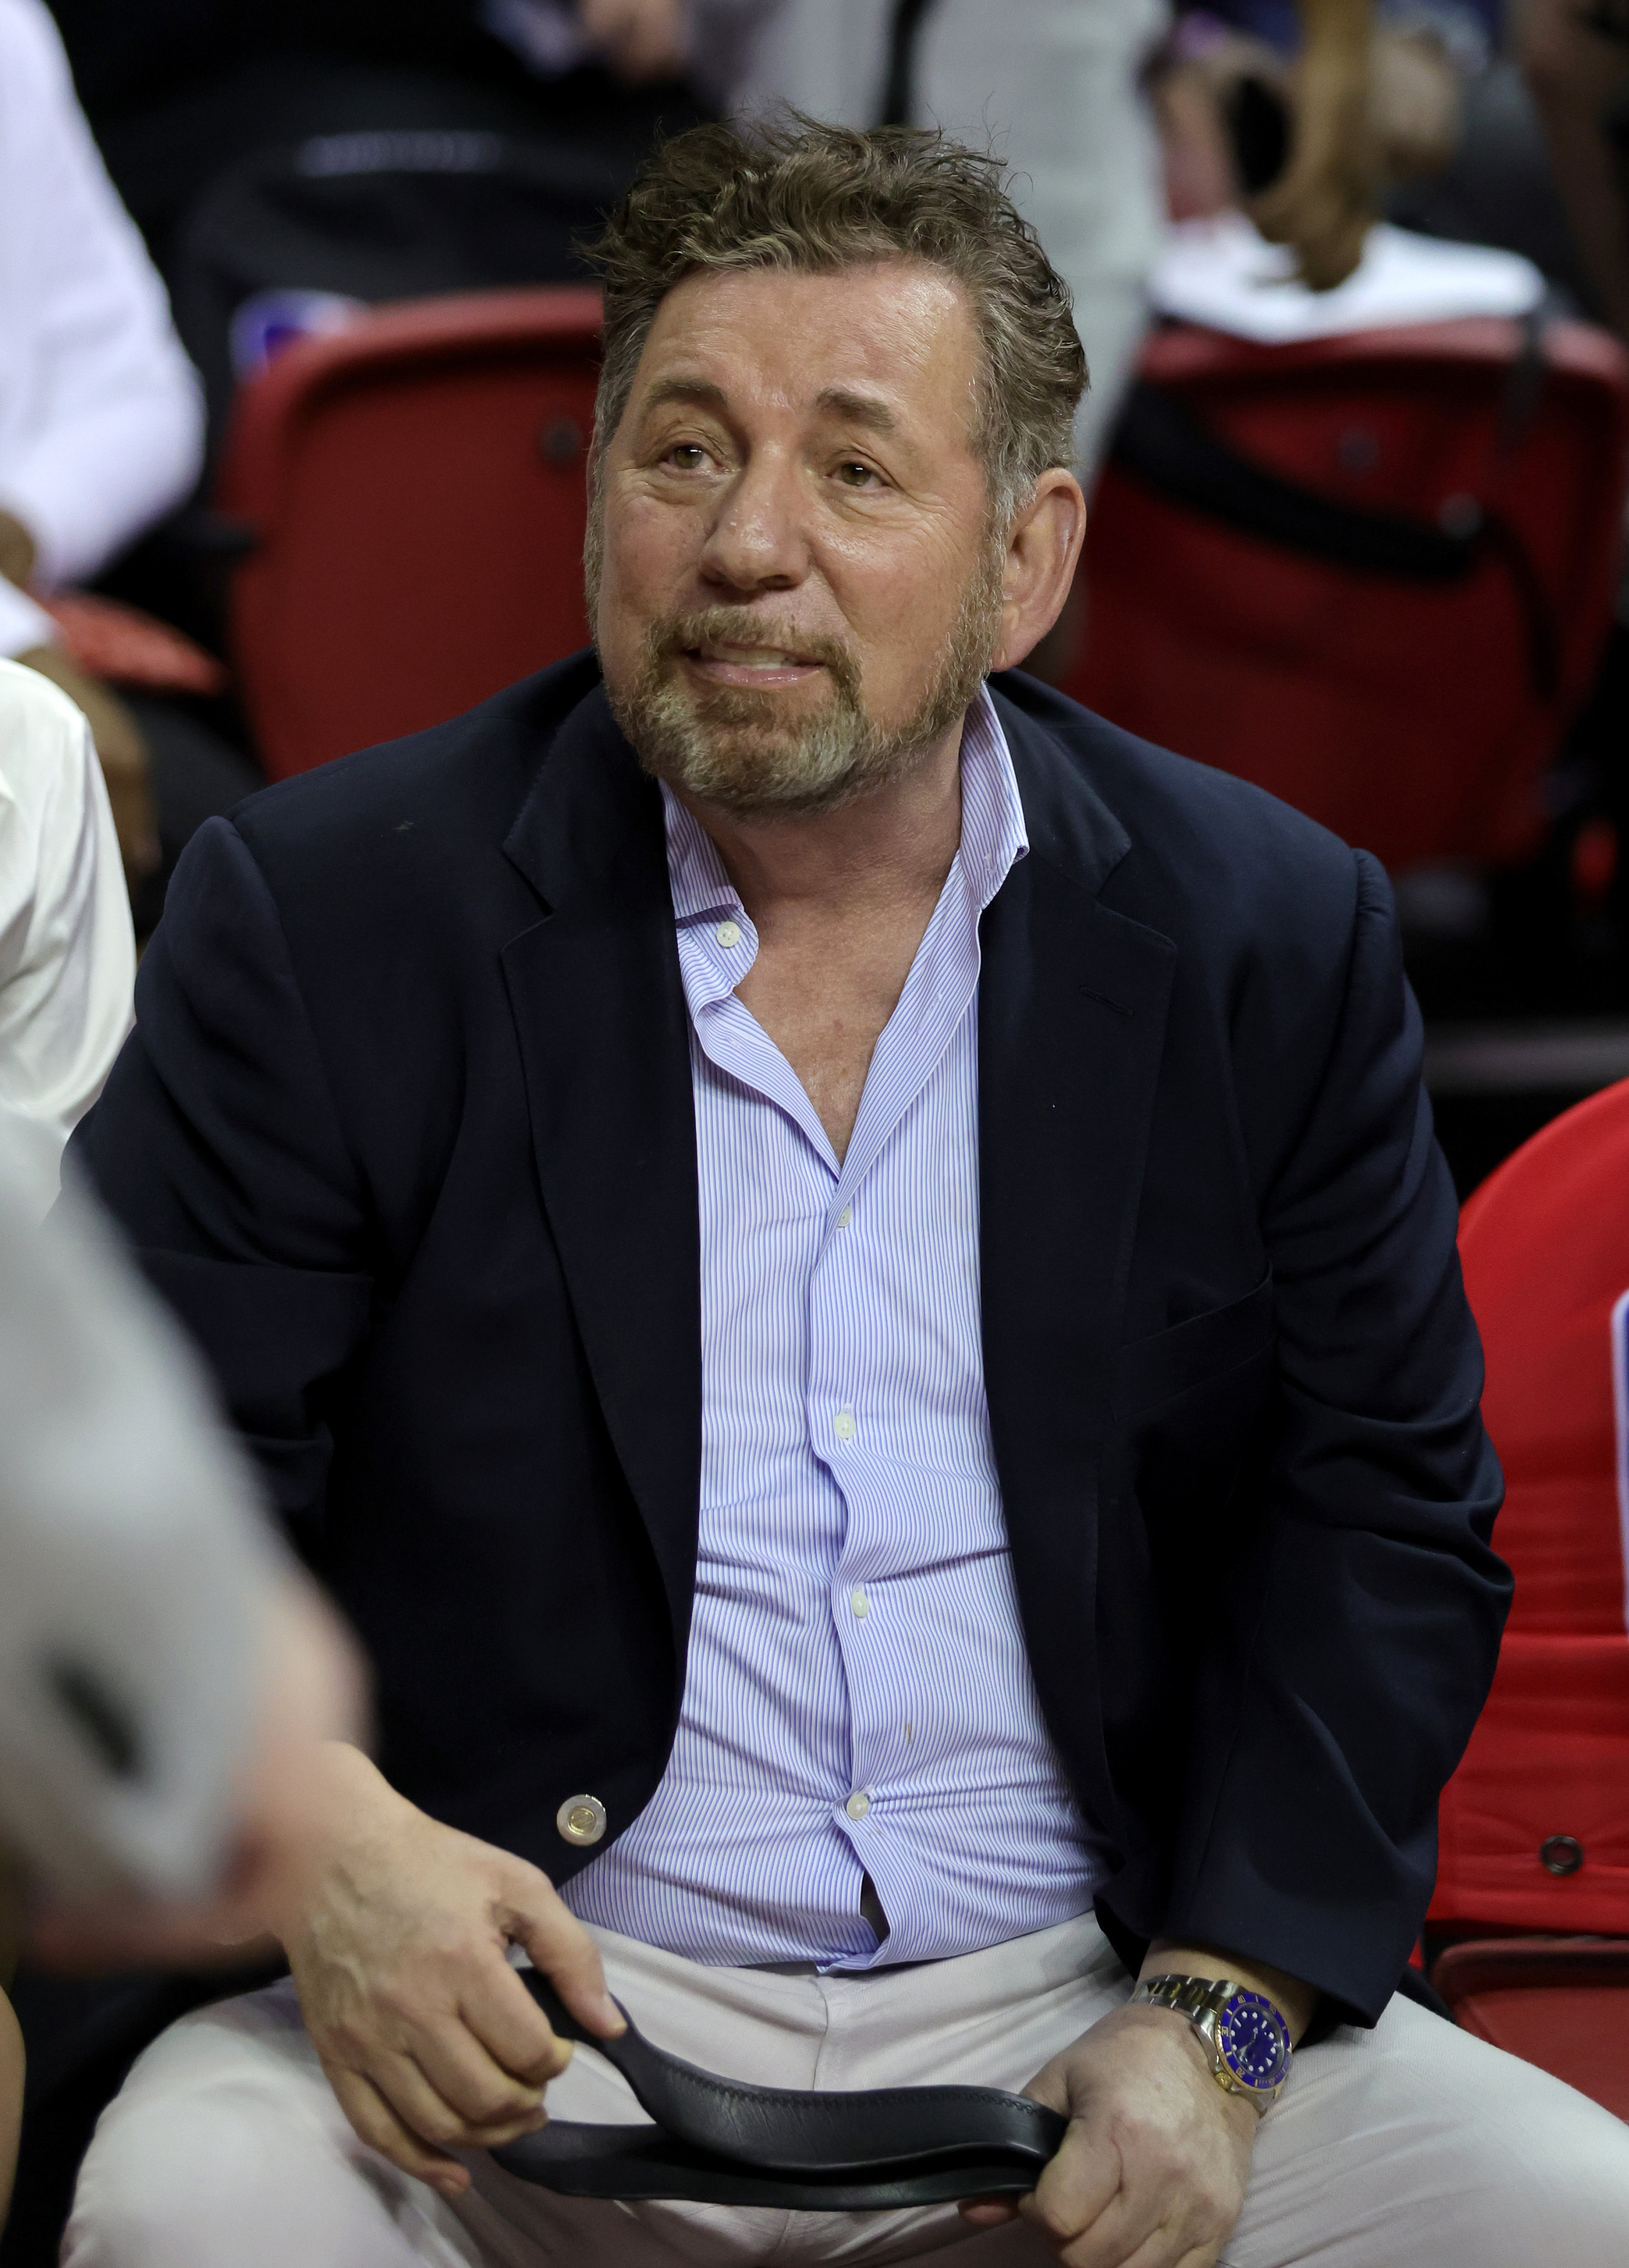 NY Knicks billionaire owner James Dolan was accused of sexual assault by a massage therapist on January 16. Photo: Getty Images